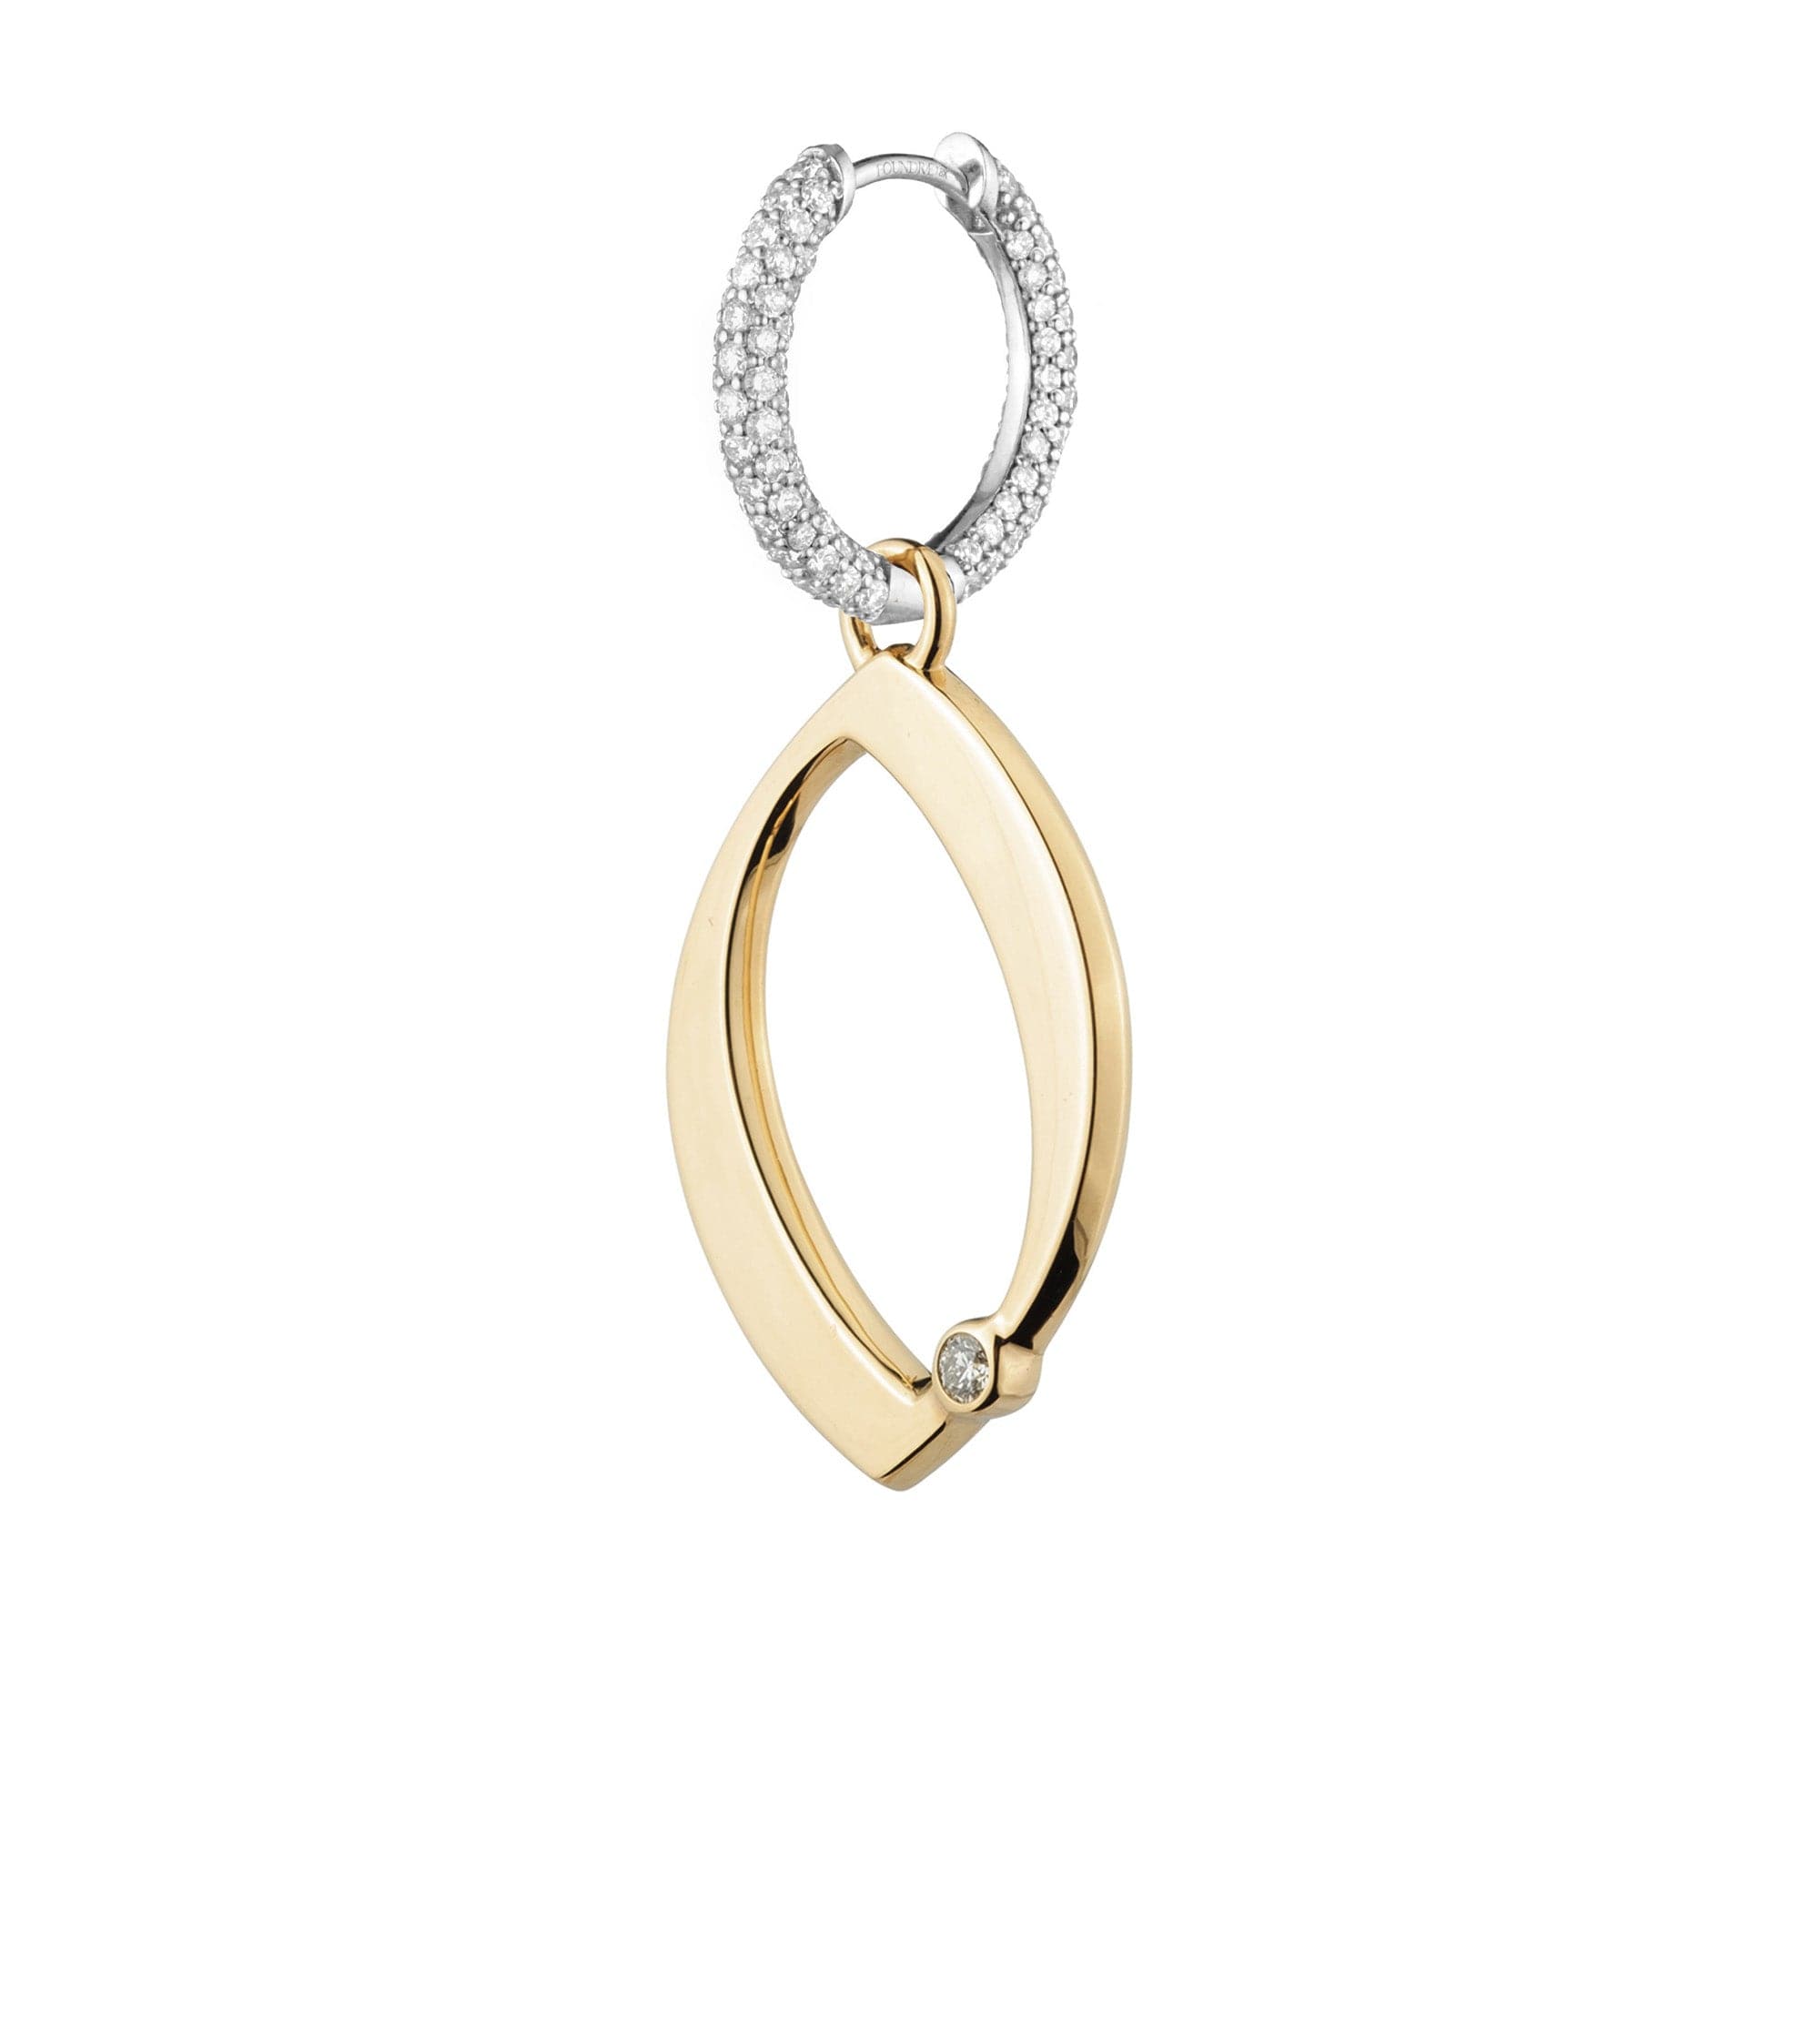 Engravable Number 0 : Oversized Small Diamond Pave Chubby Ear Hoop